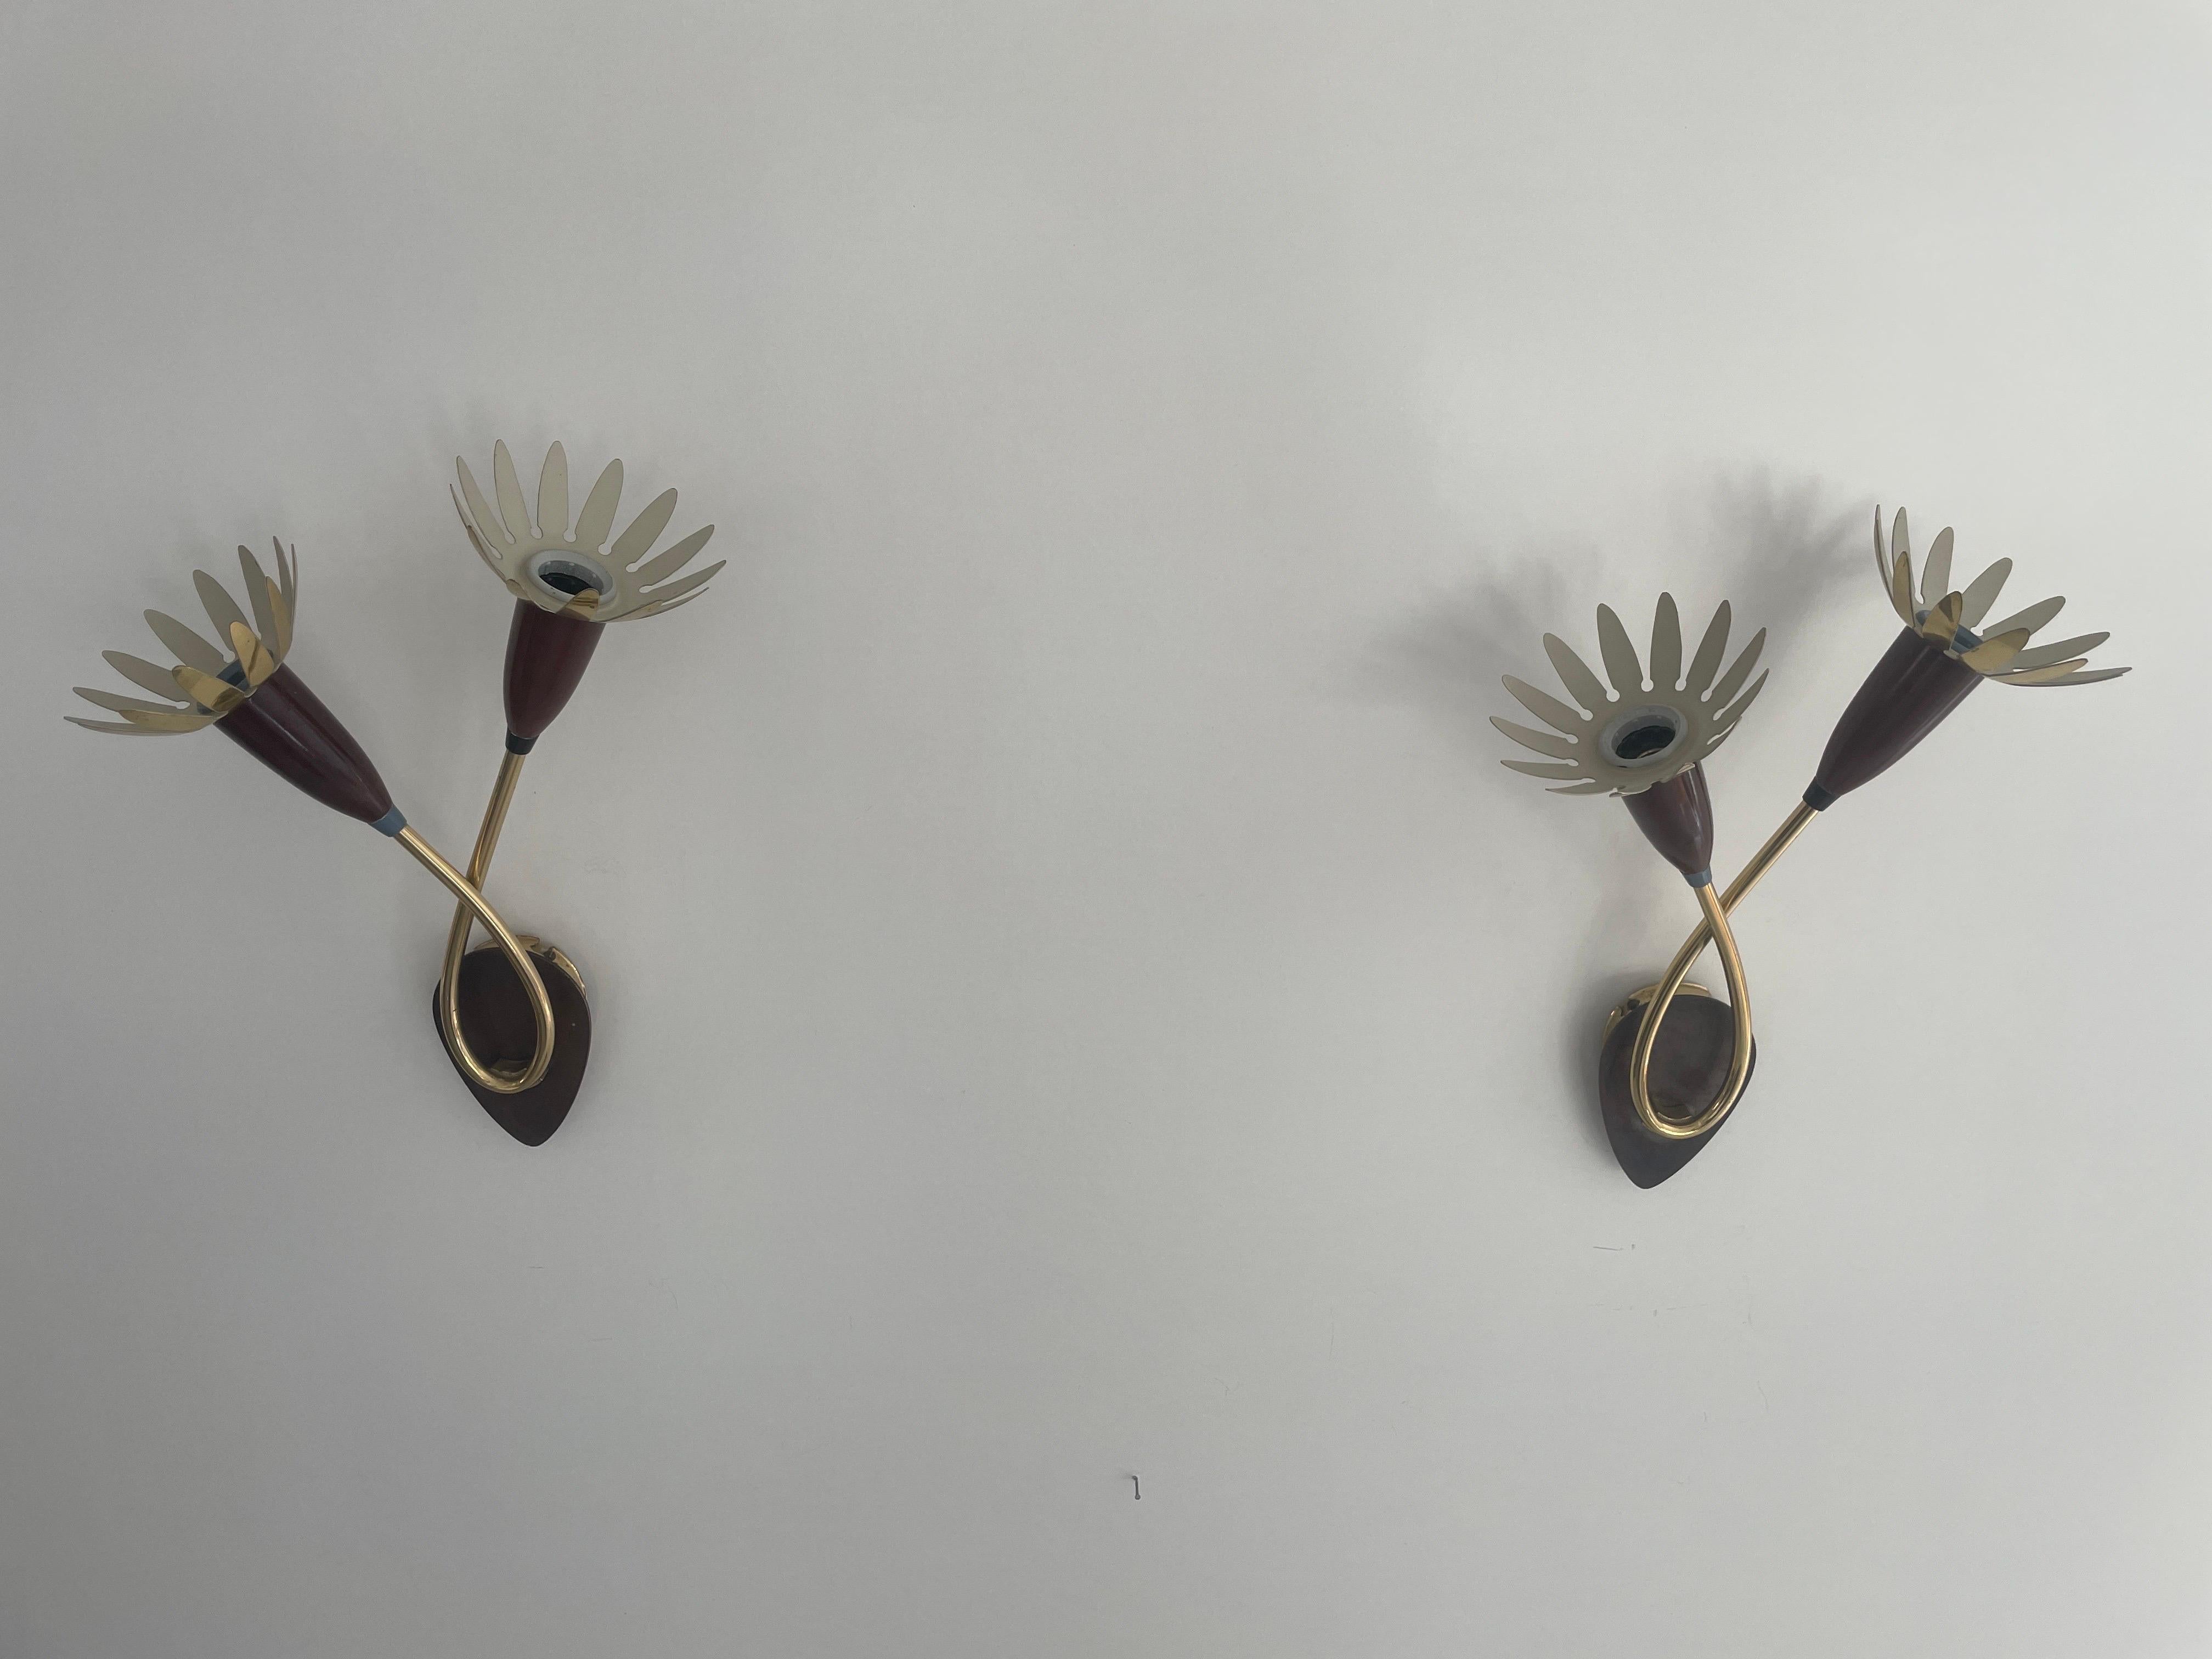 Mid-century Flower Design Pair of Sputnik Sconces, 1950s, Germany

Very elegant and Minimalist wall lamps
Lamp is in very good condition.

These lamps works with E14 standard light bulbs. 
Wired and suitable to use in all countries. (110-220